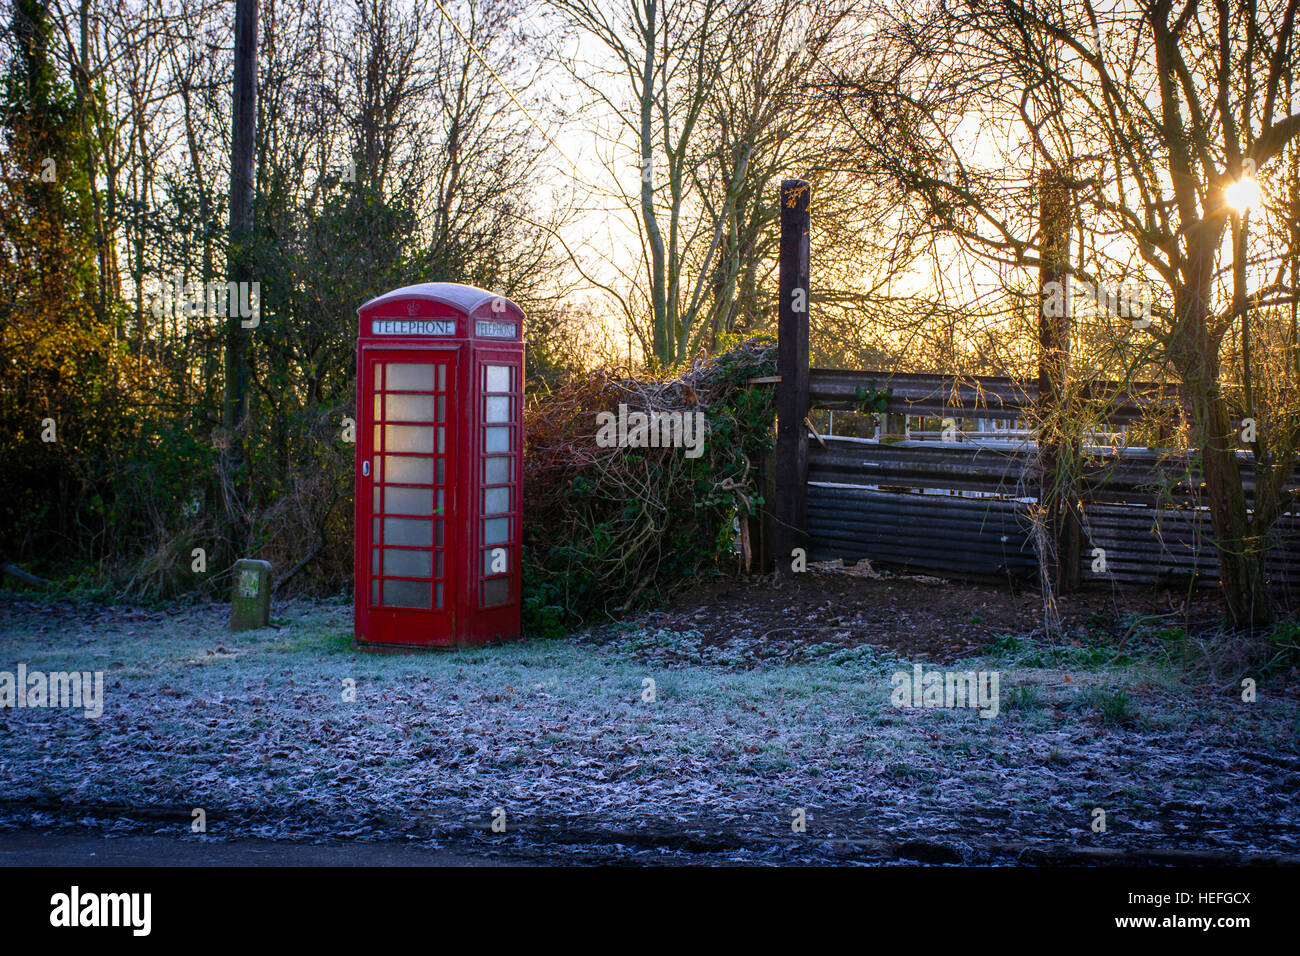 a red telepphone box in a countryside setting on a frosty morning Stock Photo